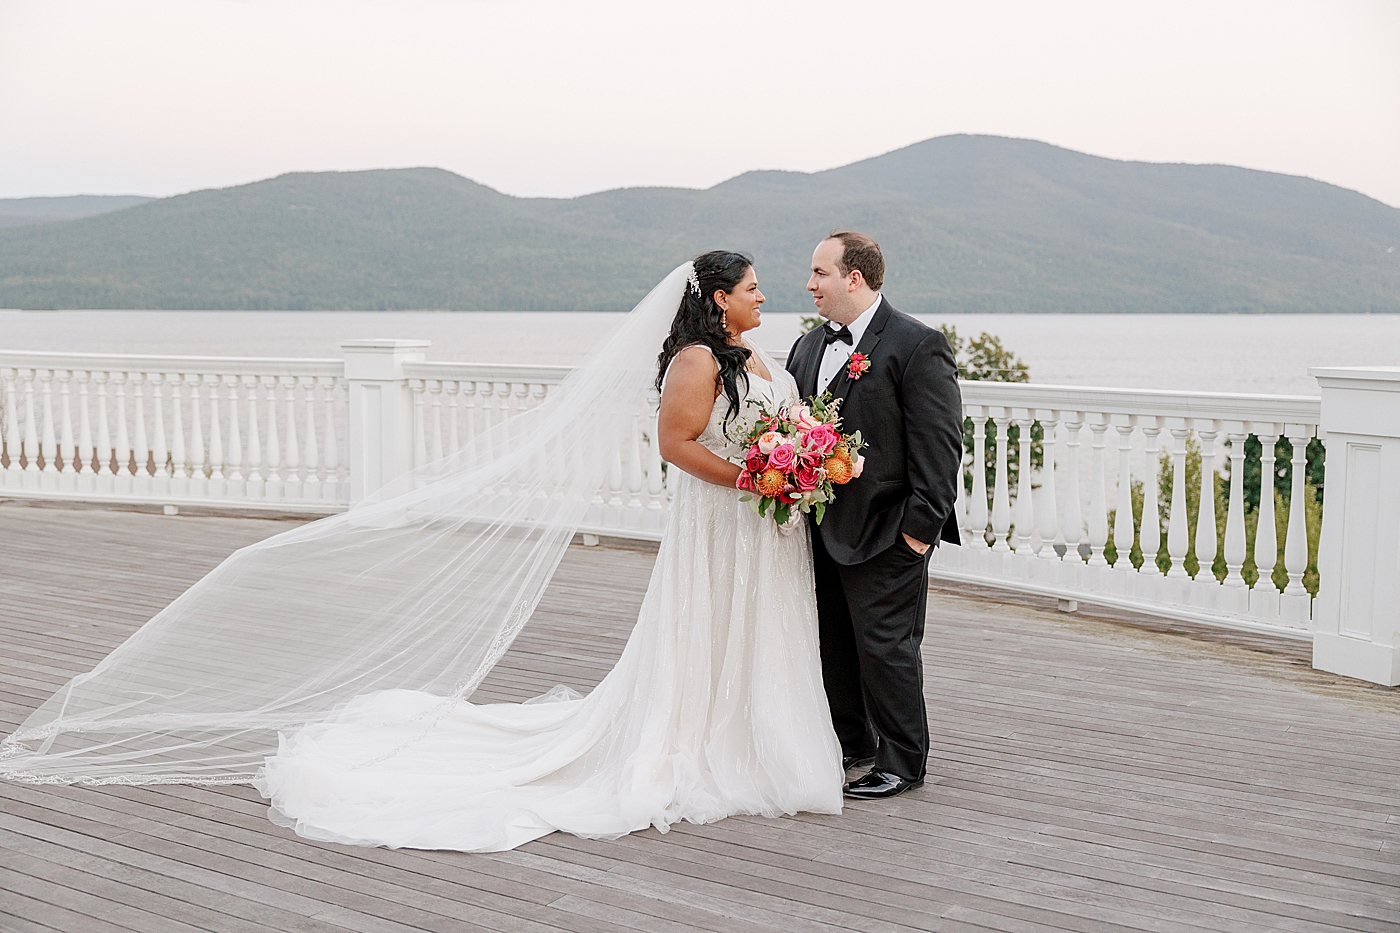 Bride and groom looking at each other on a deck with water and mountains in the background  | Image by Hope Helmuth Photography